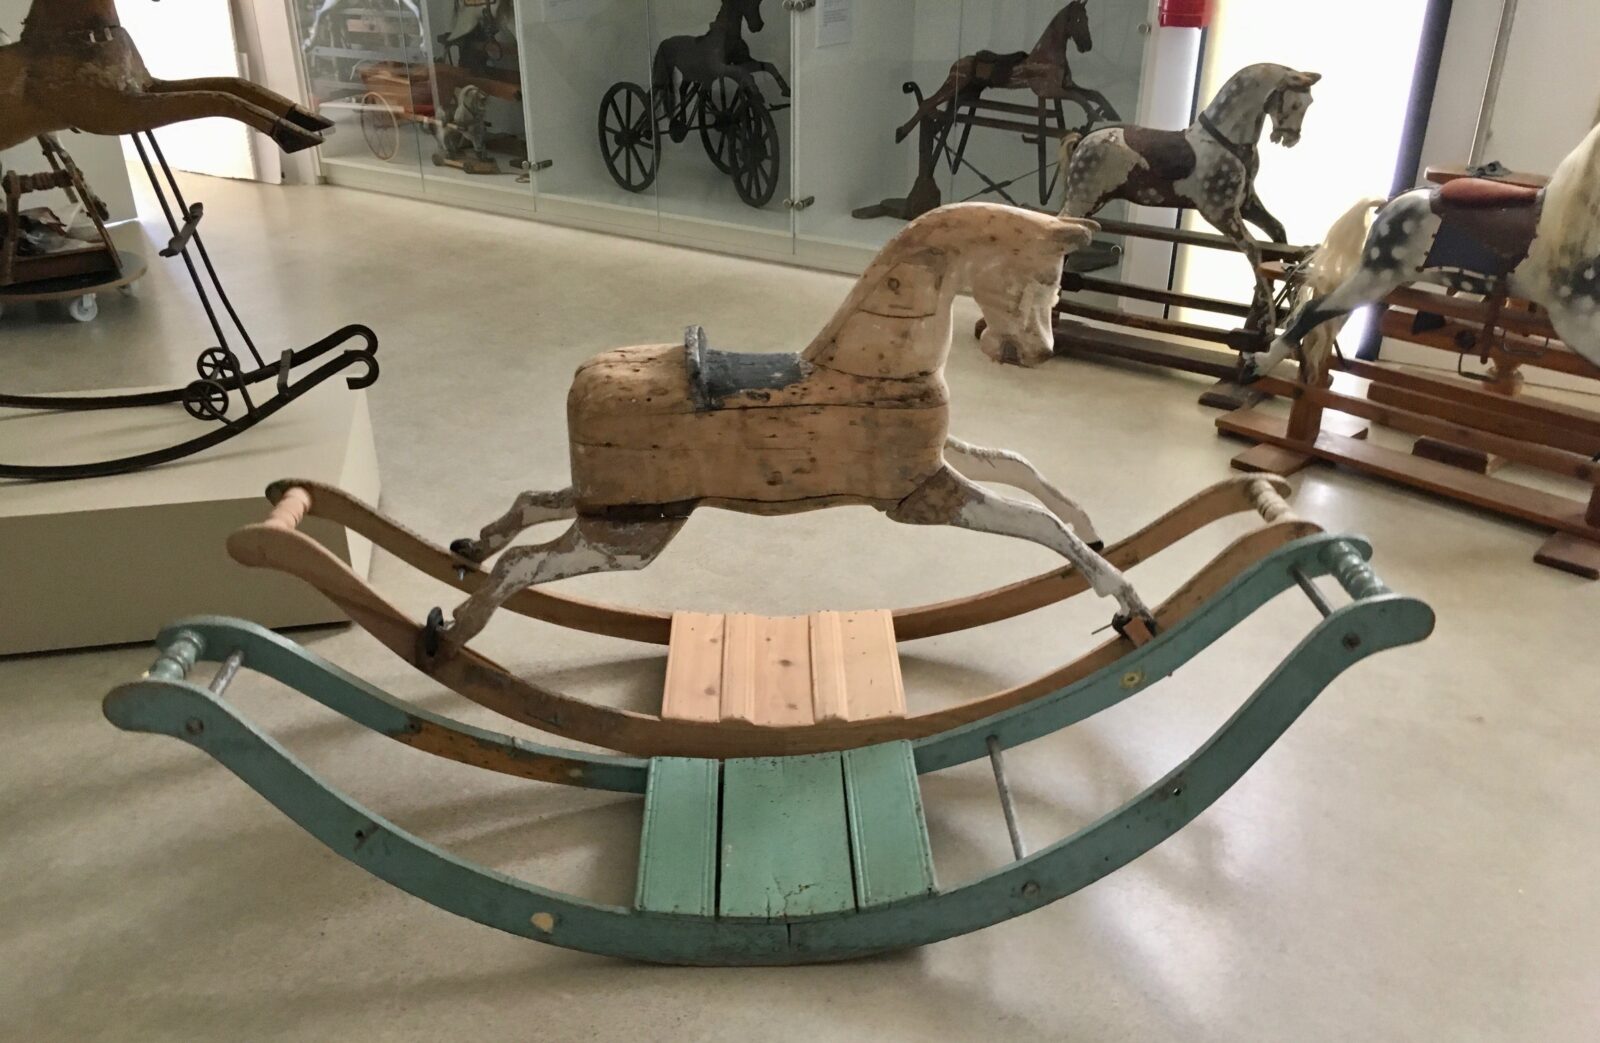 Inside the Equus Museum with a bow rocking horse during restoration.